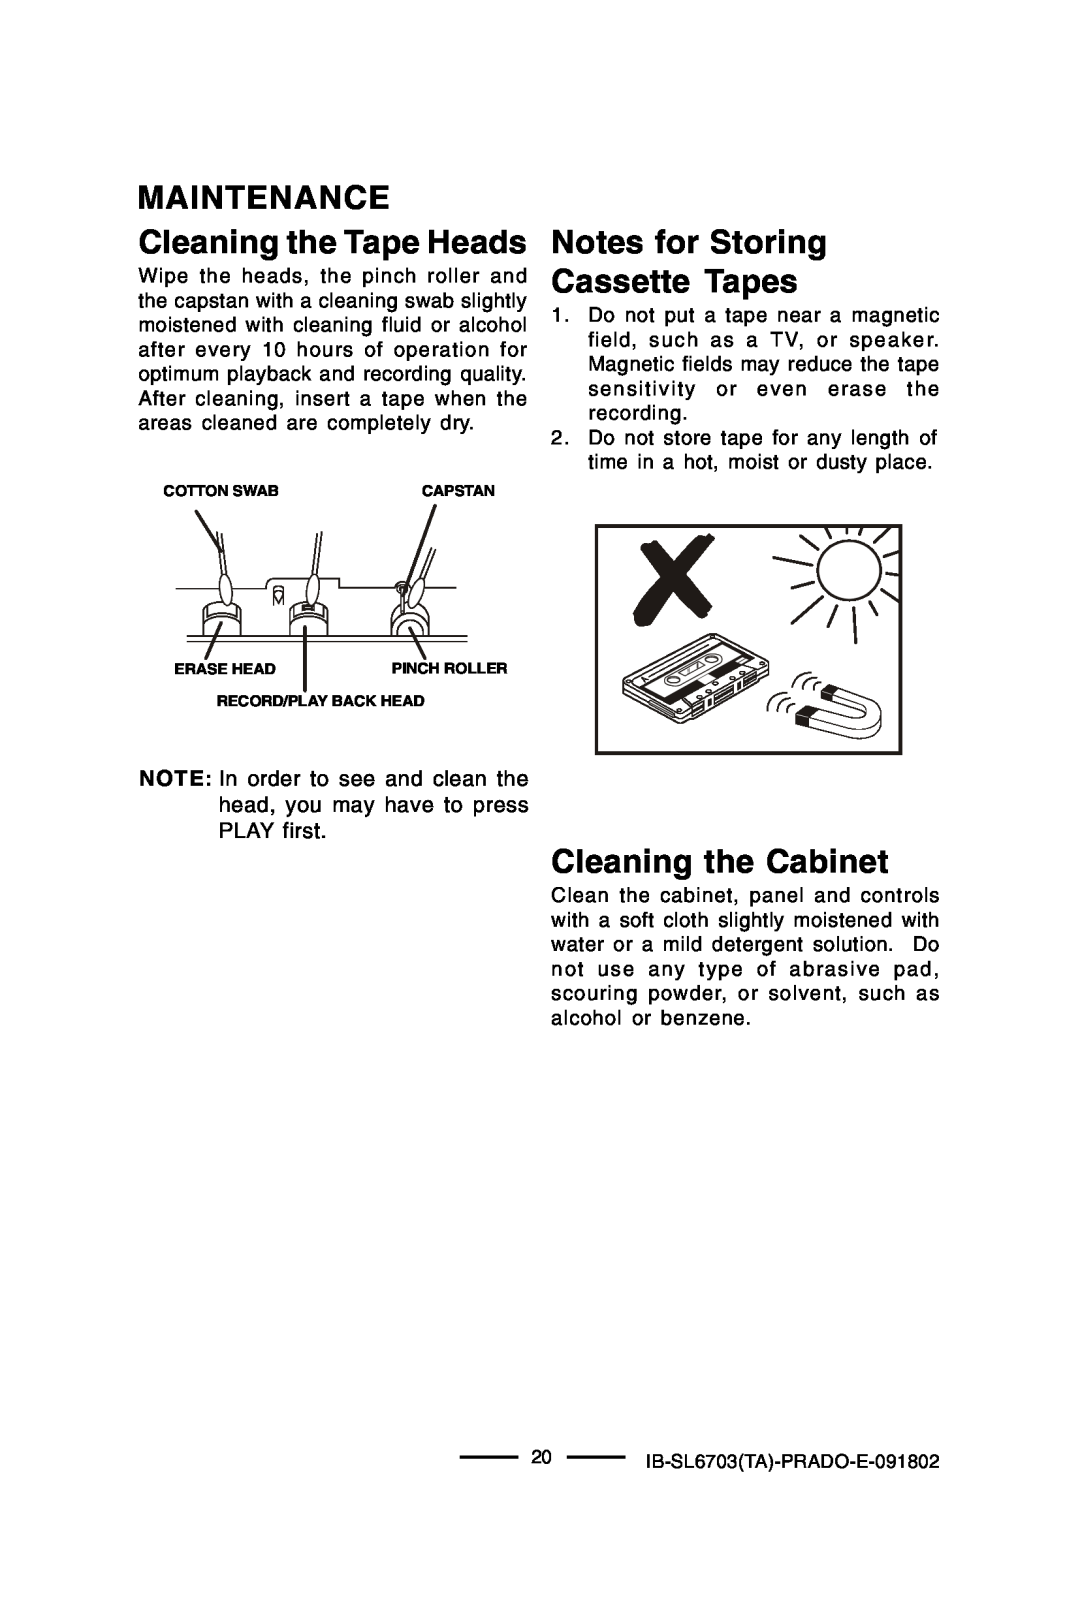 Lenoxx Electronics SL-6703 MAINTENANCE Cleaning the Tape Heads, Notes for Storing Cassette Tapes, Cleaning the Cabinet 